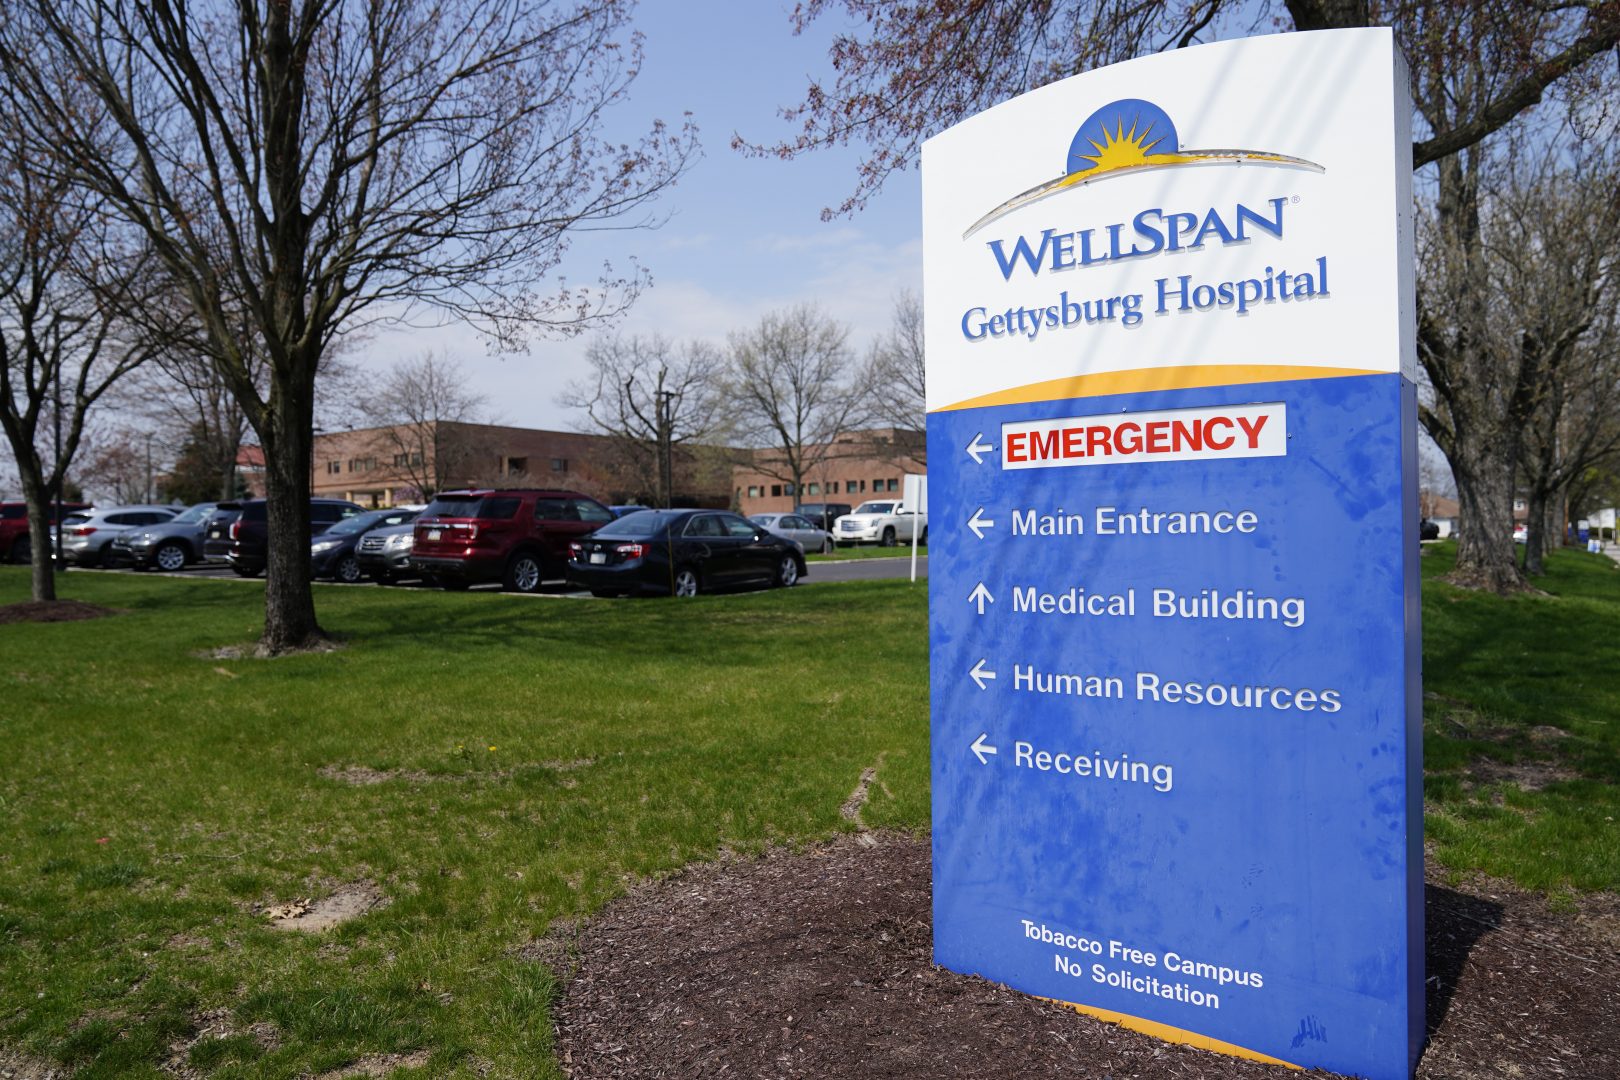 FILE PHOTO: This April 7, 2021 photo shows the WellSpan Gettysburg Hospital in Gettysburg, Pa. The health system announced Friday it will stop allowing most emergency department visitors at its Chambersburg and Waynesboro hospitals due to a flood of unvaccinated people sick with COVID-19.